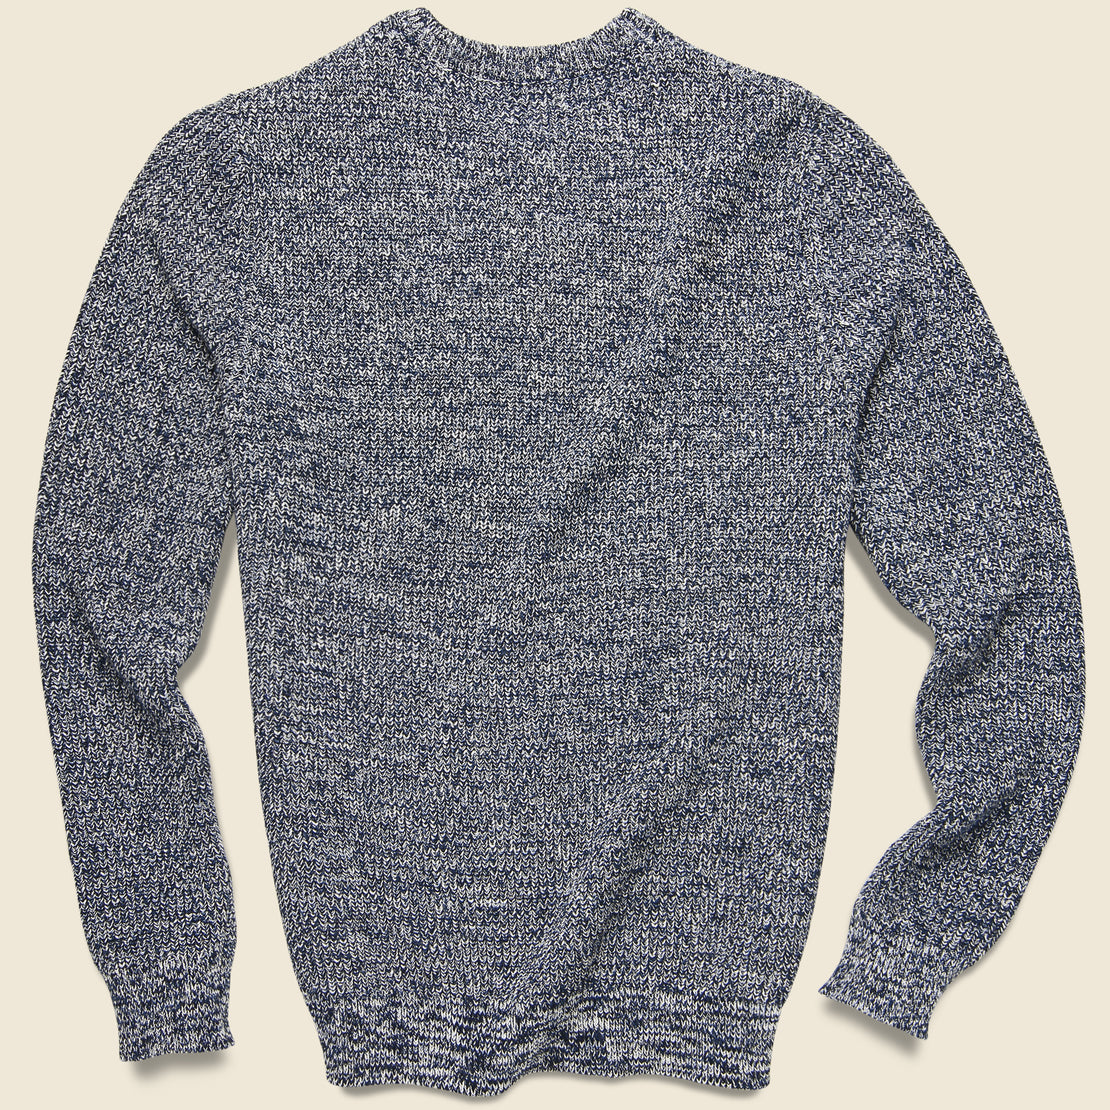 Cotton Ragg Crewneck Sweater - Navy - Barque - STAG Provisions - Tops - Sweater